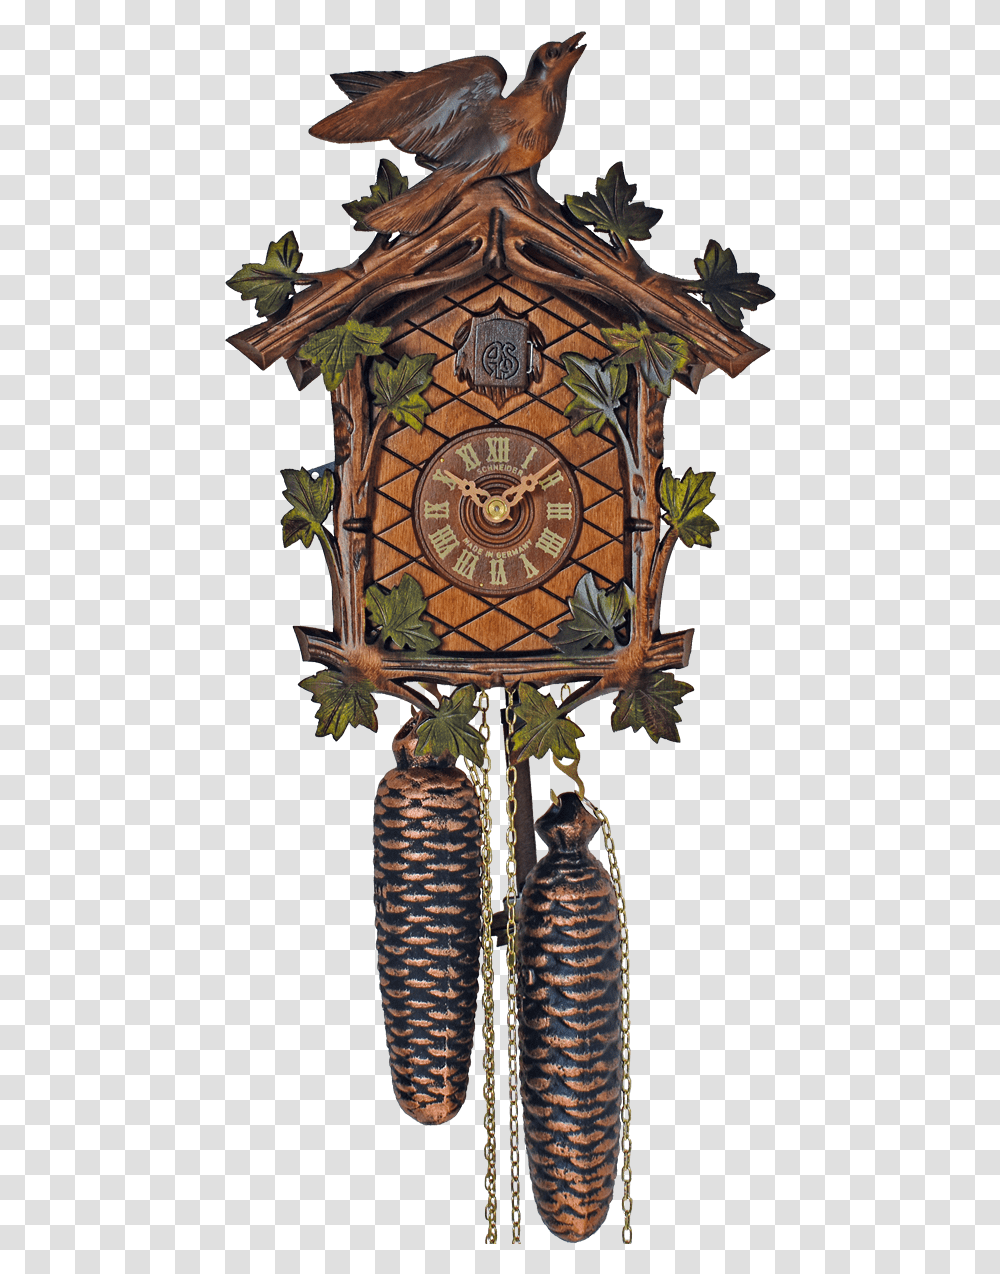 Day With Green Leaves Amp Bird Cuckoo Clock, Animal, Analog Clock, Plant, Clock Tower Transparent Png